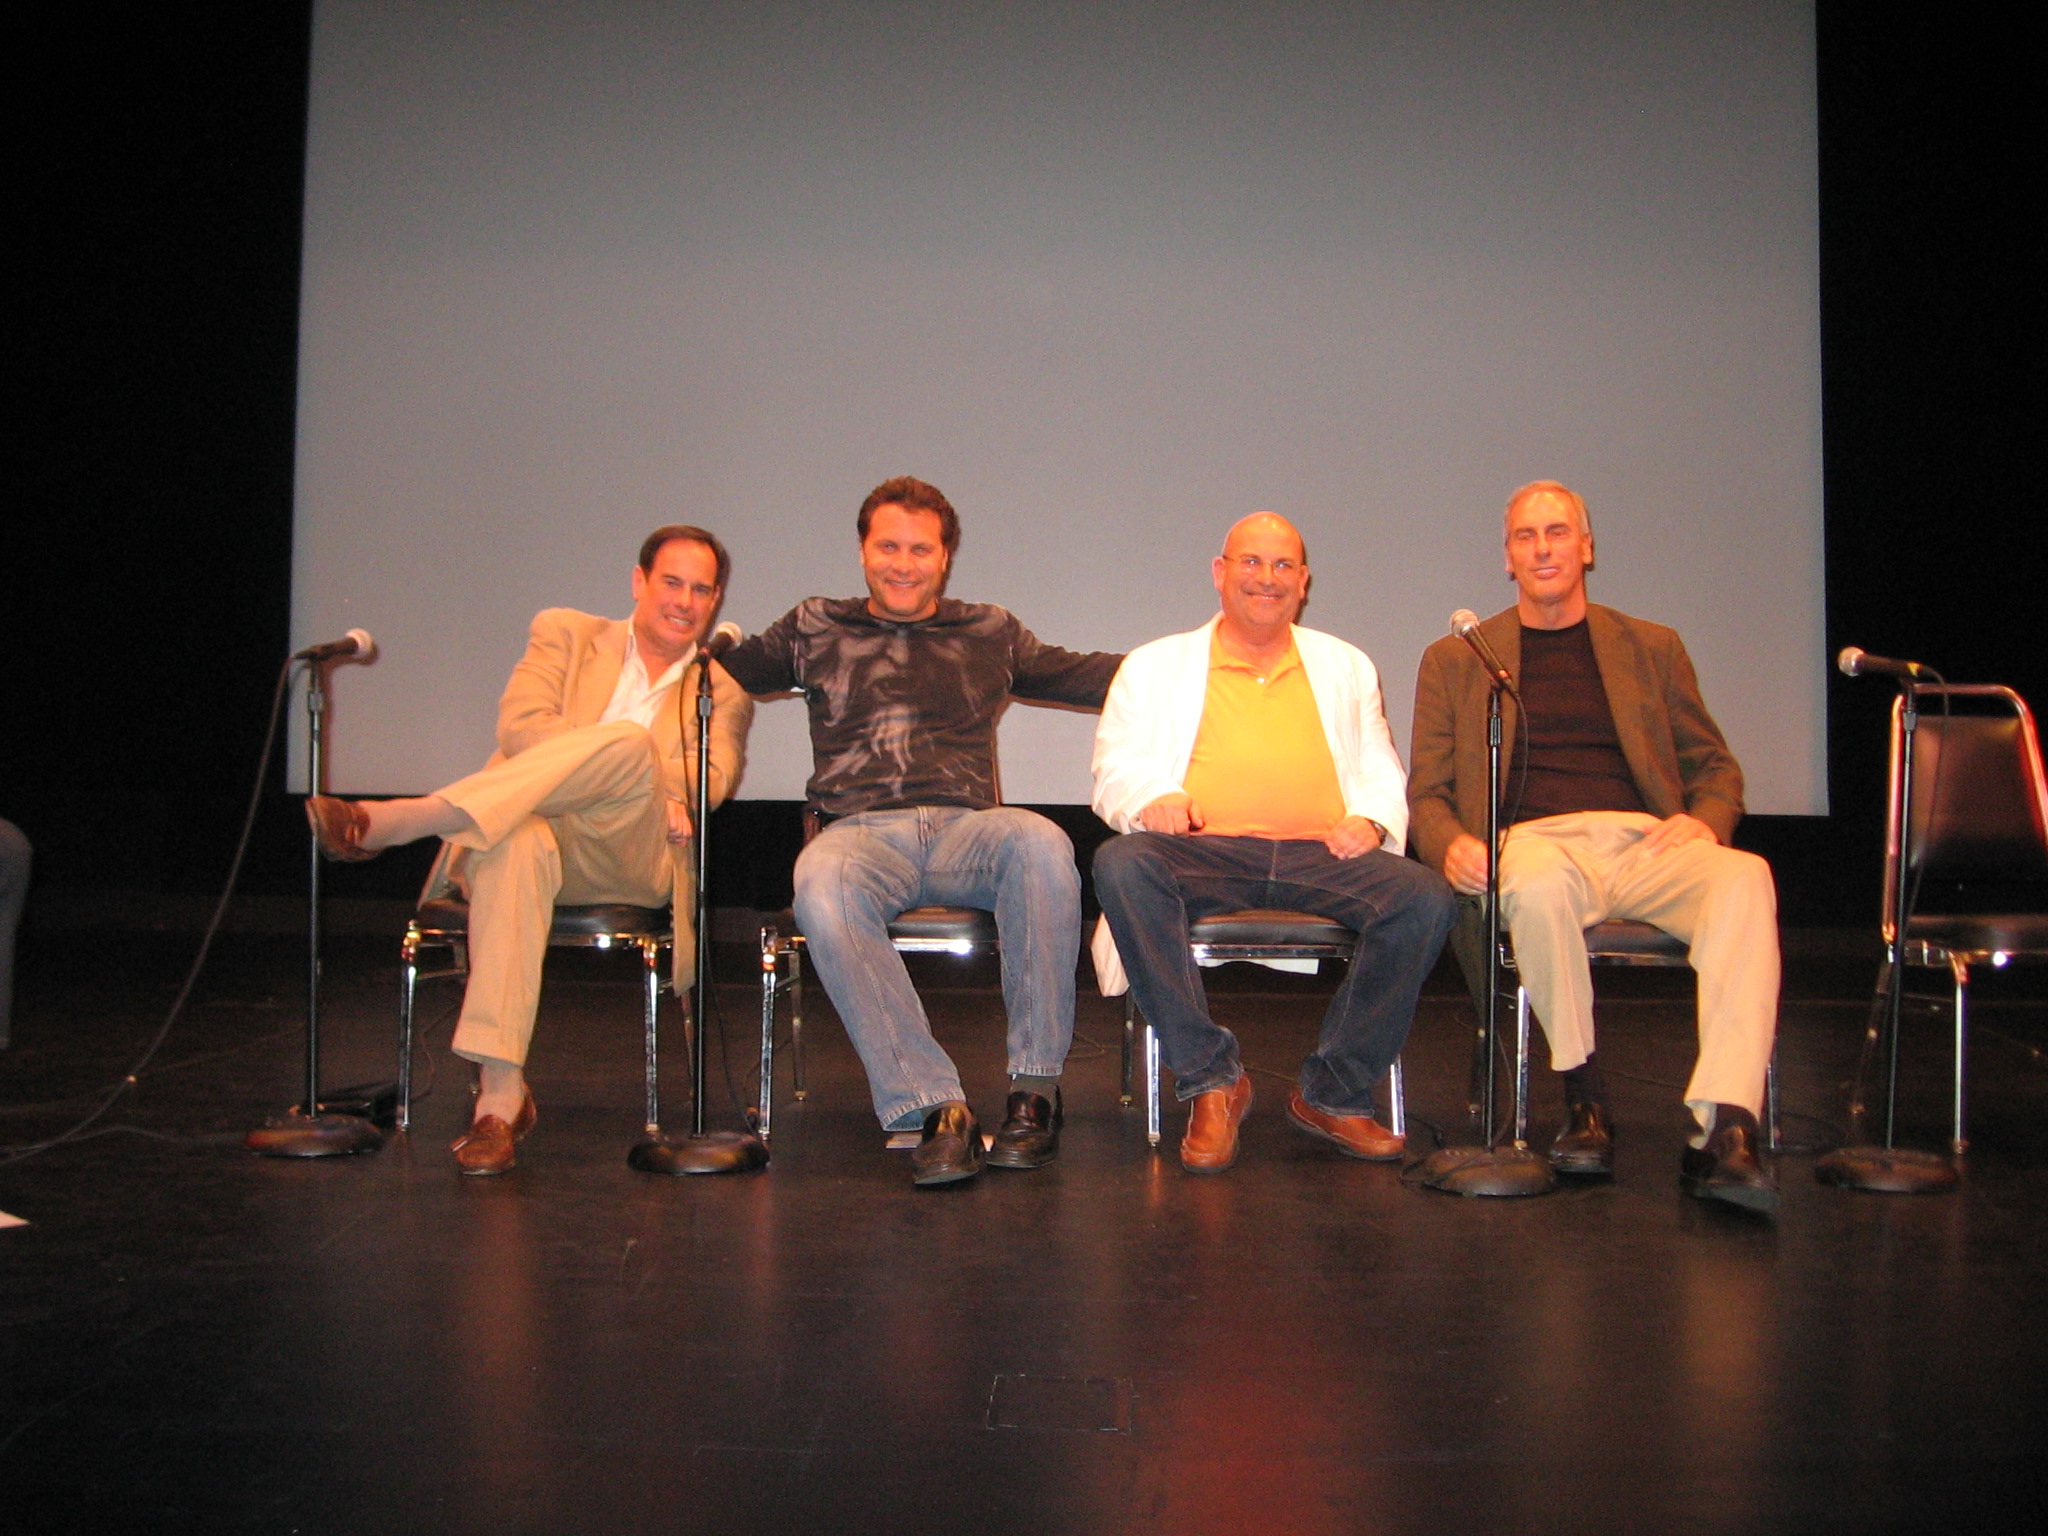 Panel at the US Sports Festival during Super Bowl 2010.